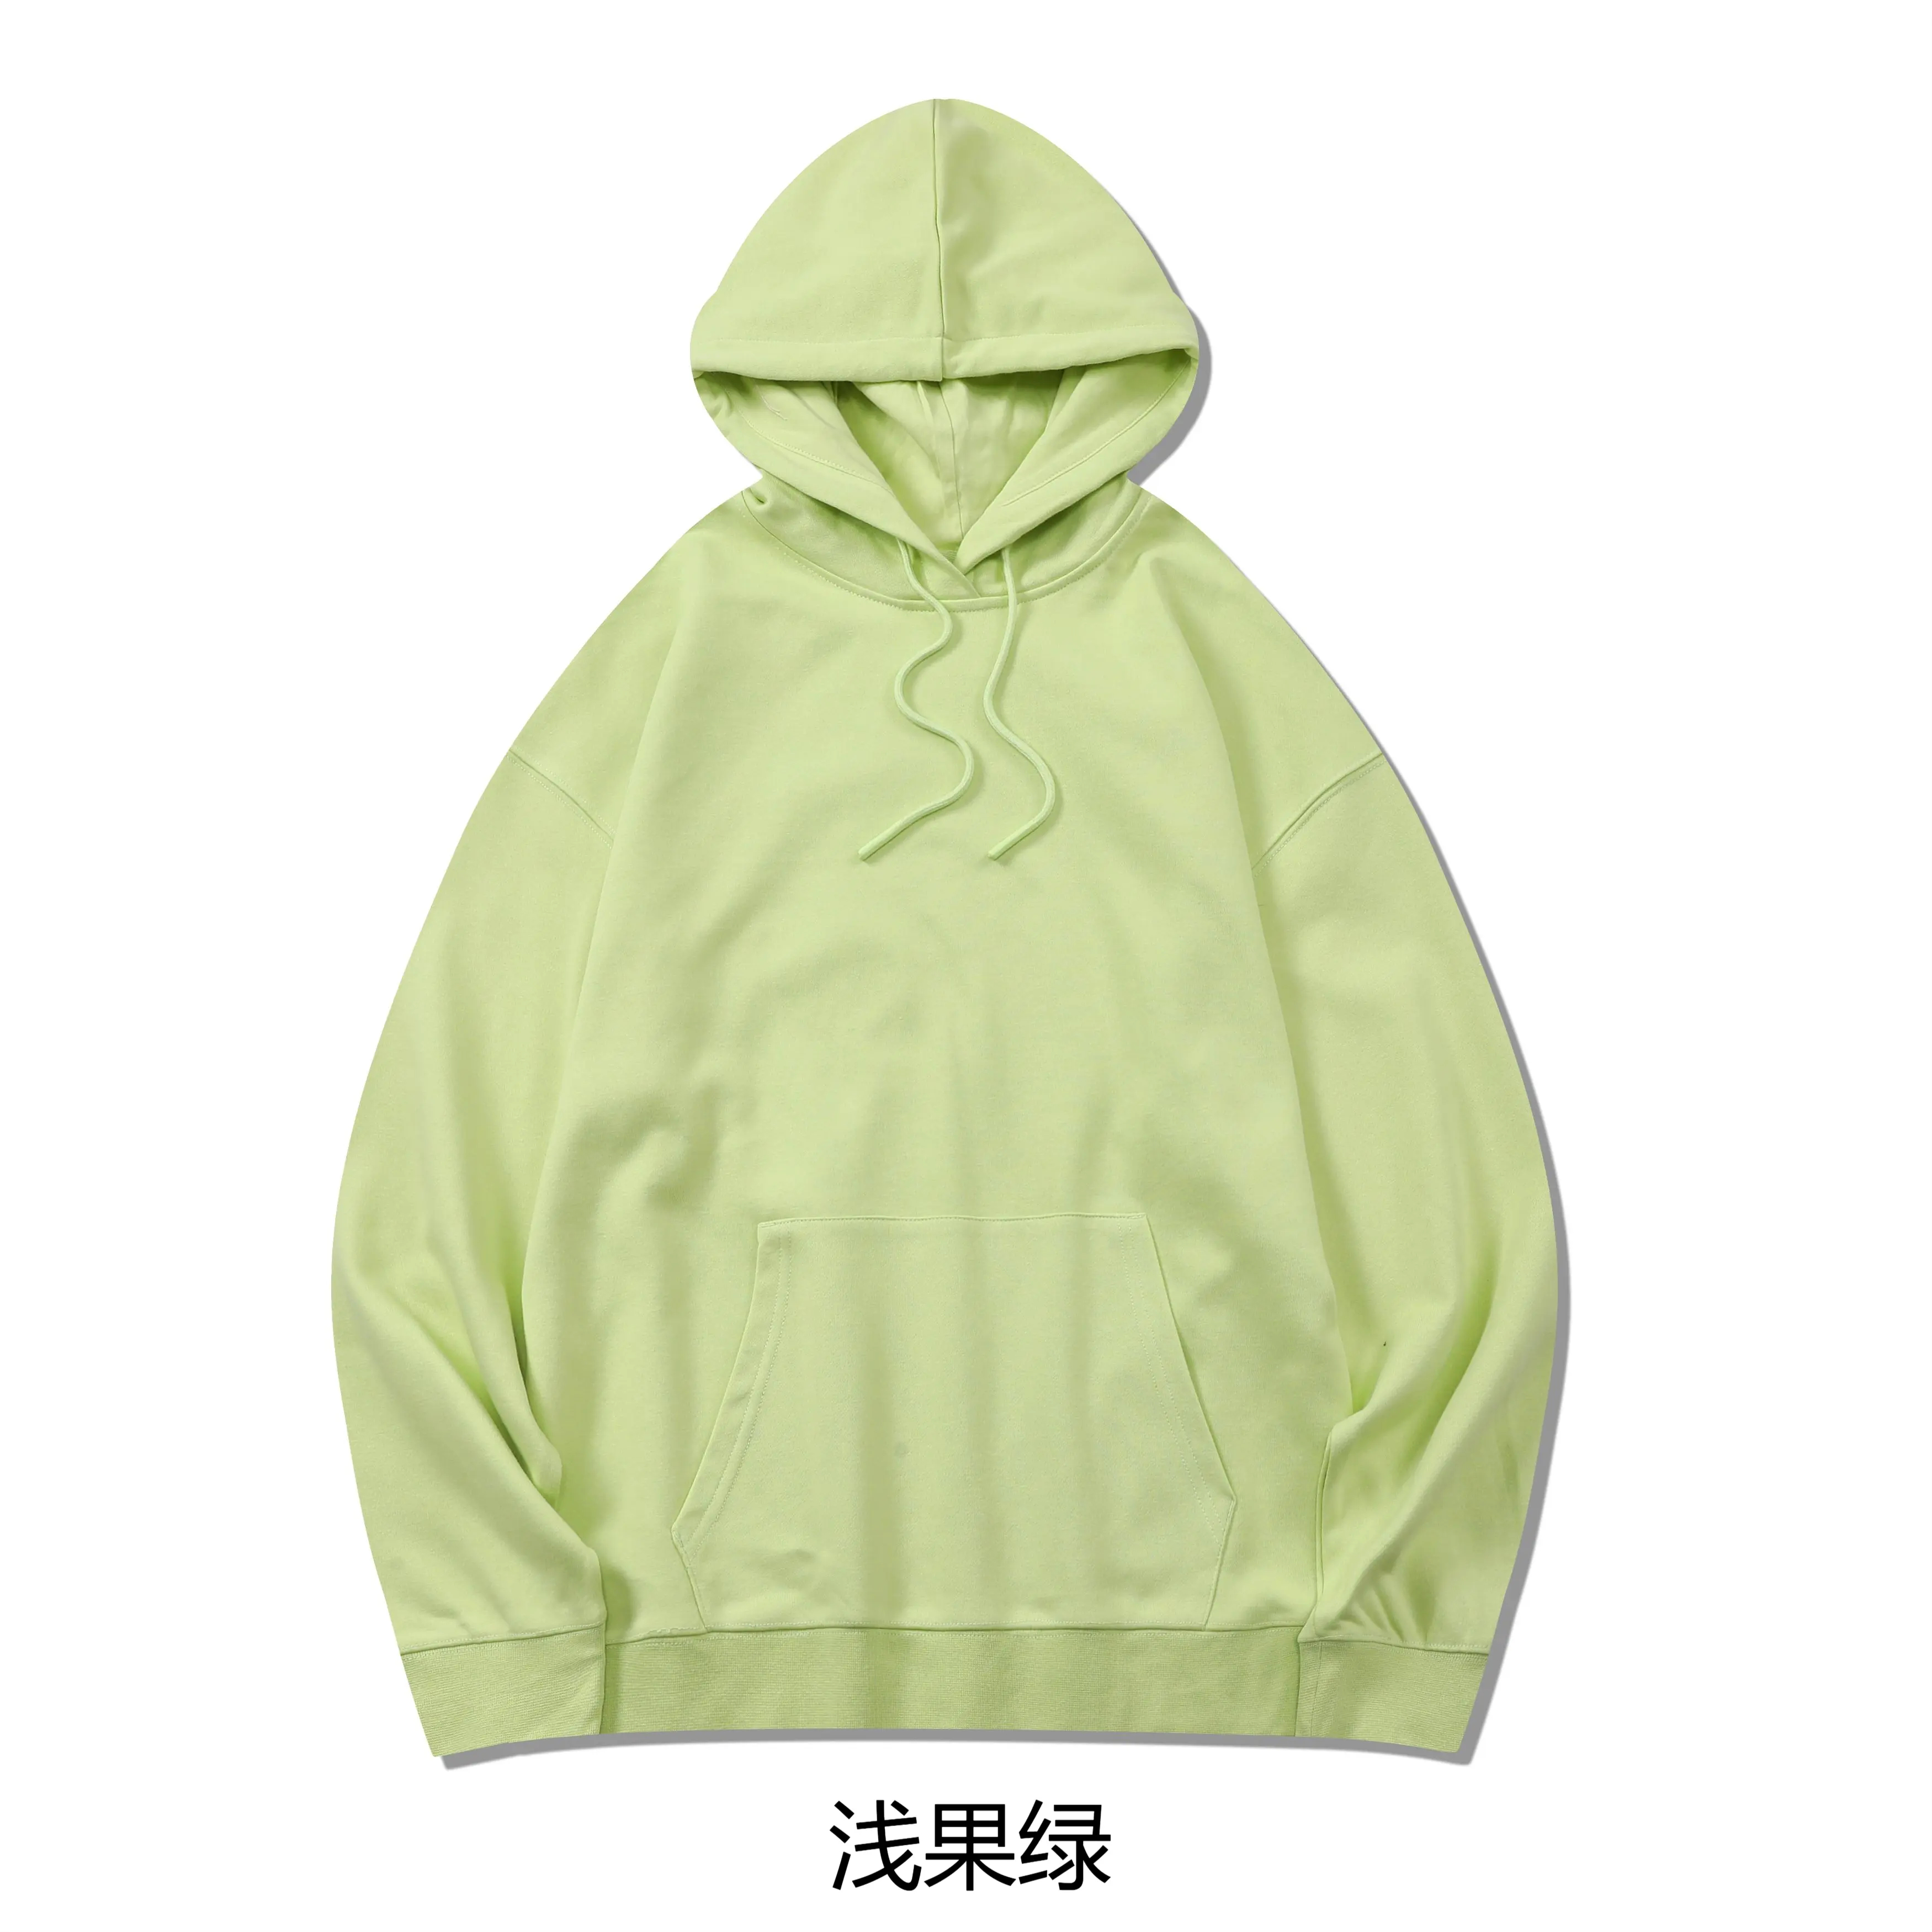 Fashion autumn and winter hoodie high-quality hoodie pullover sweatshirt men's oversized casual hoodie